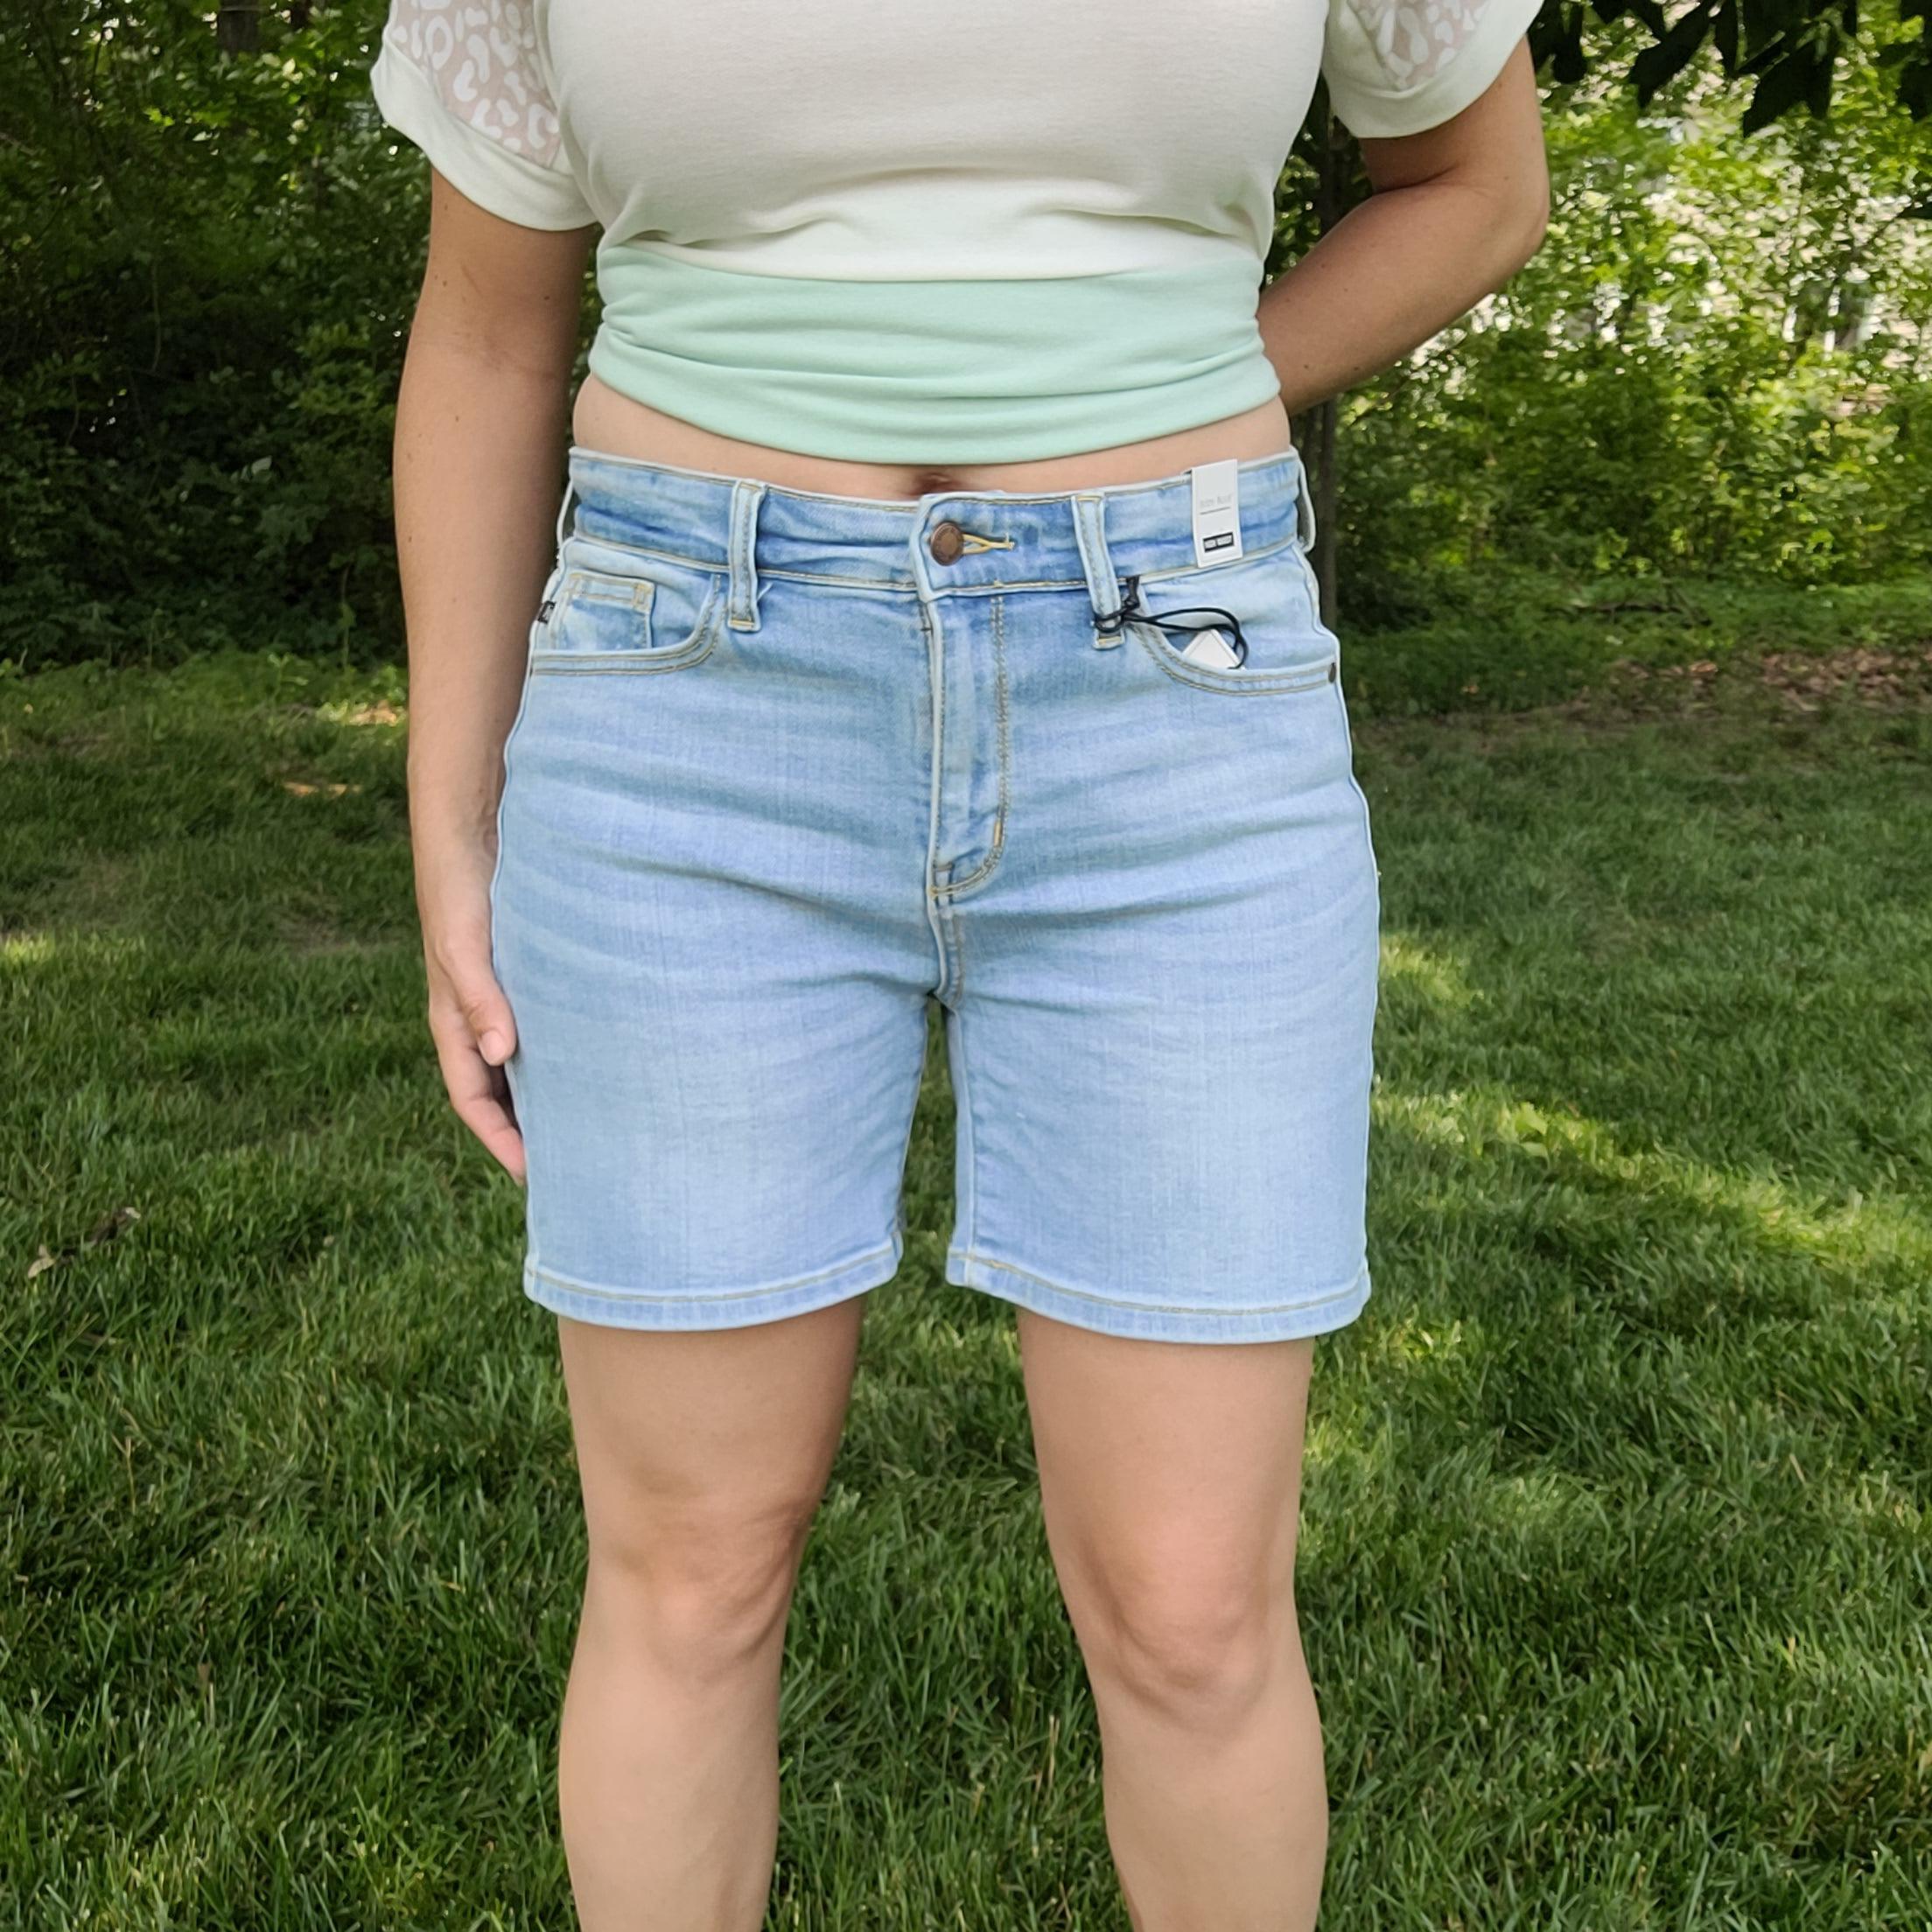 Shop Better Than Ever Denim Shorts | Judy Blue-Shorts at Ruby Joy Boutique, a Women's Clothing Store in Pickerington, Ohio